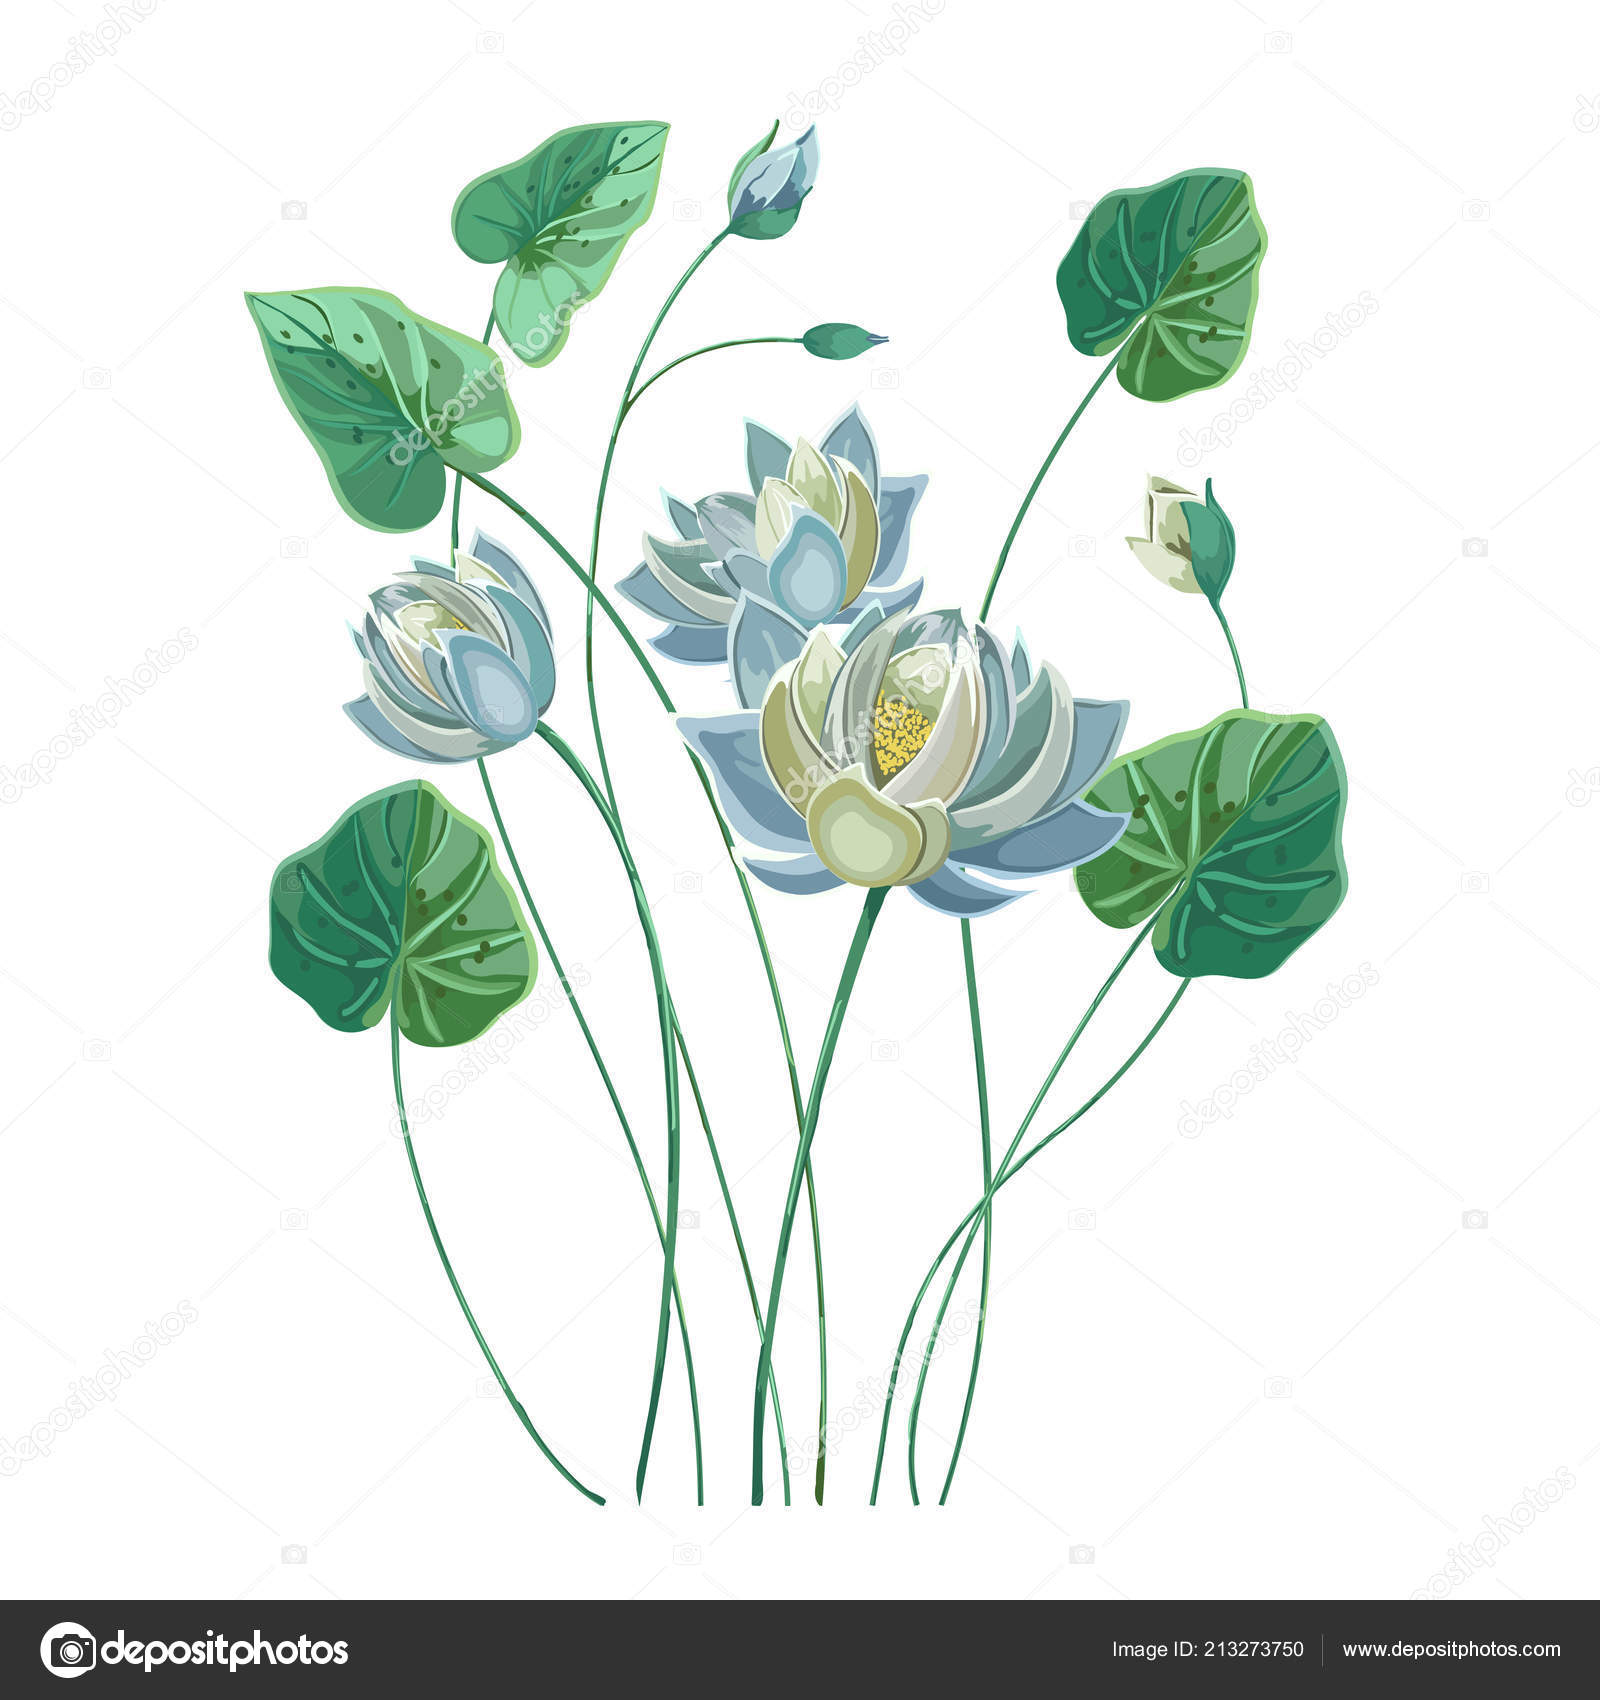 Blue Lotus Drawing Composition Blue Lotus Flower Green Leaves Hand Drawn Style Pastel Stock Vector C Tanyalmera 213273750